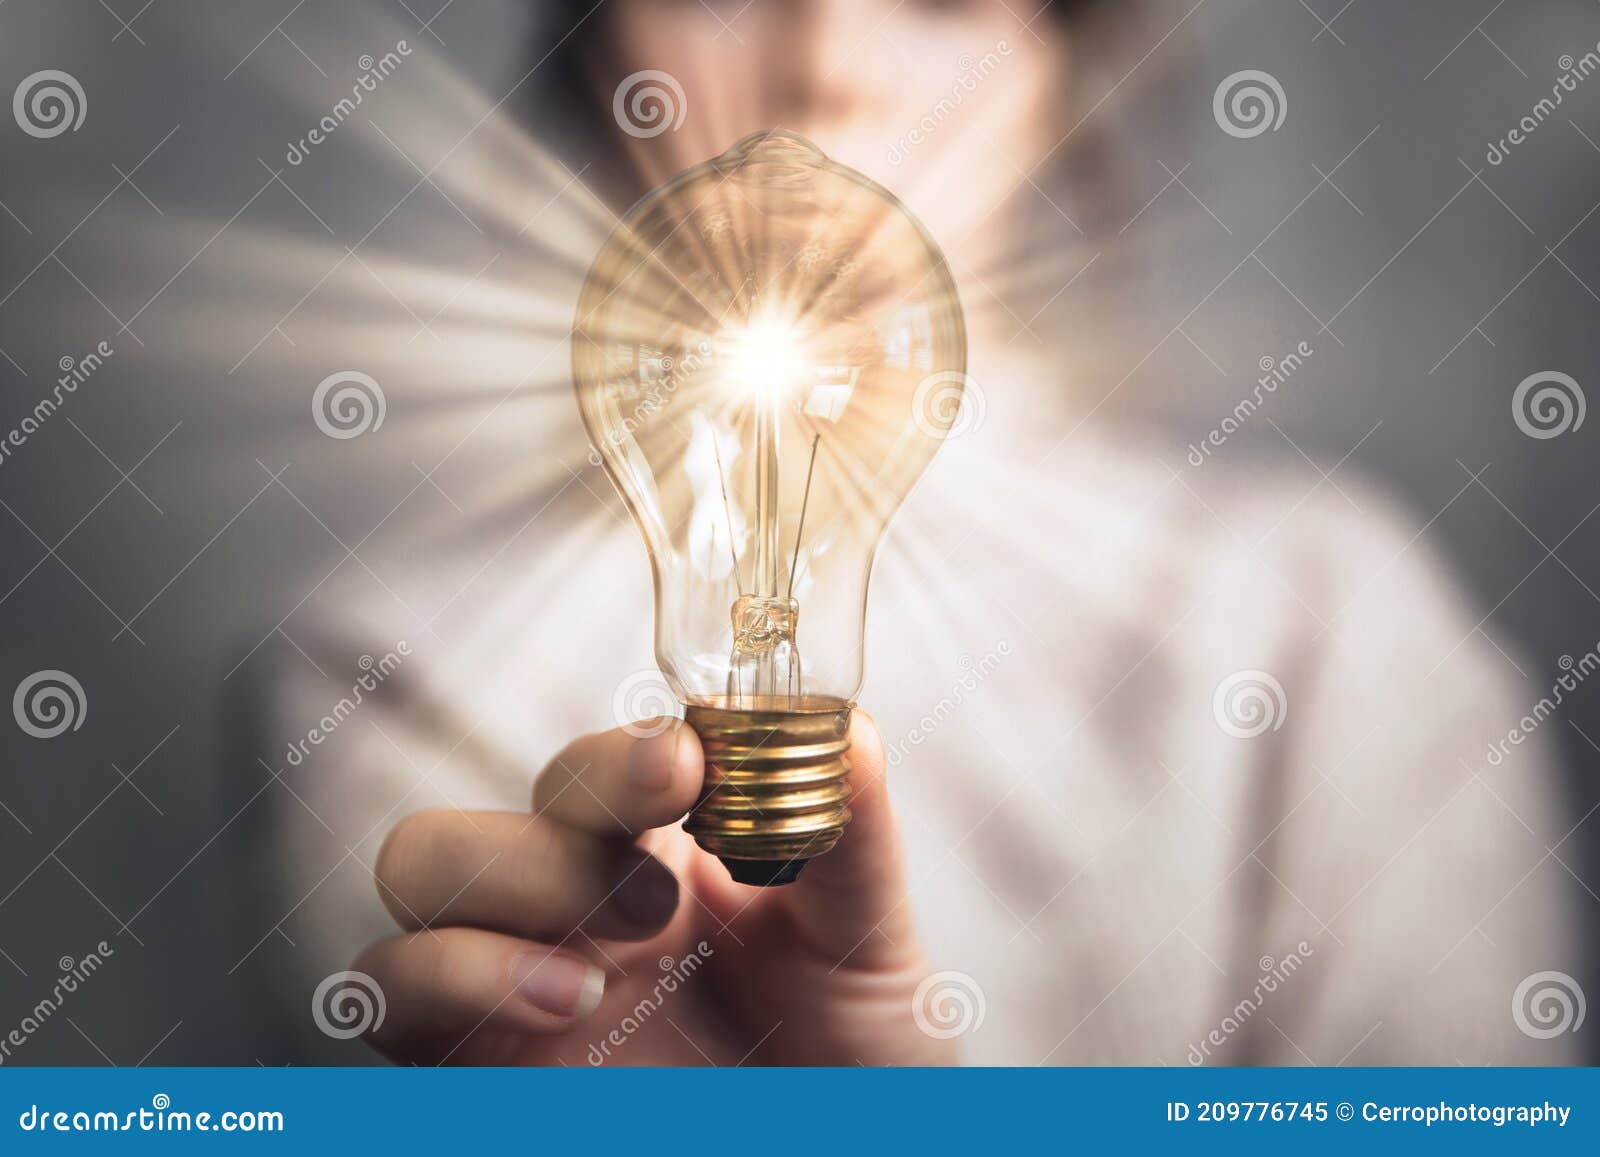 female hand holding a shining light bulb, great idea, innovation and inspiration, business concept background